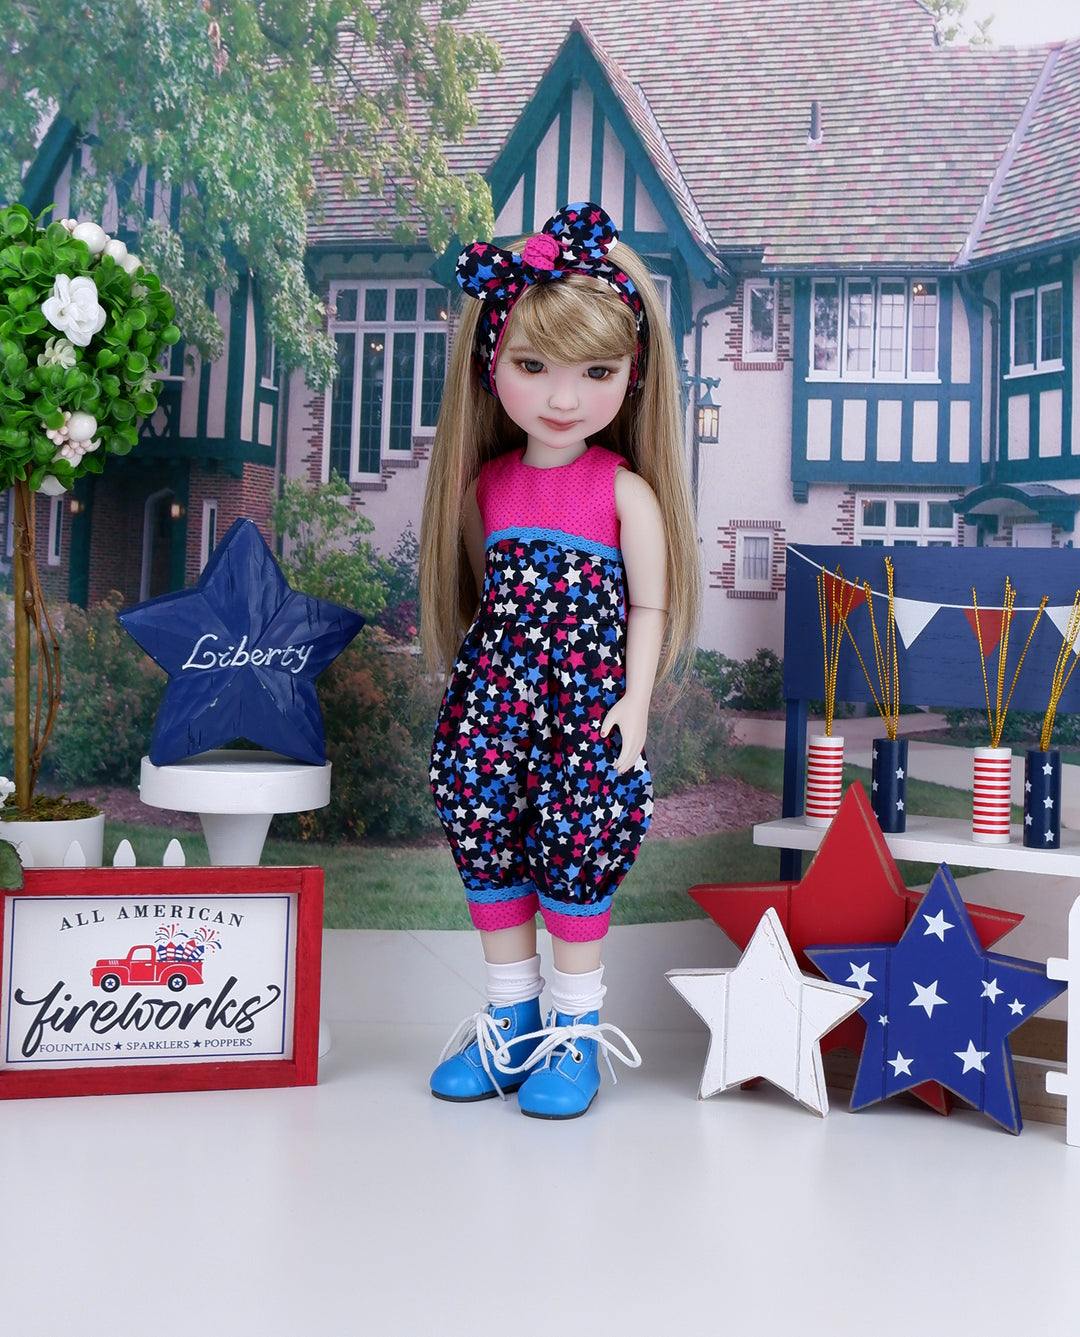 Bright Stars - romper with boots for Ruby Red Fashion Friends doll